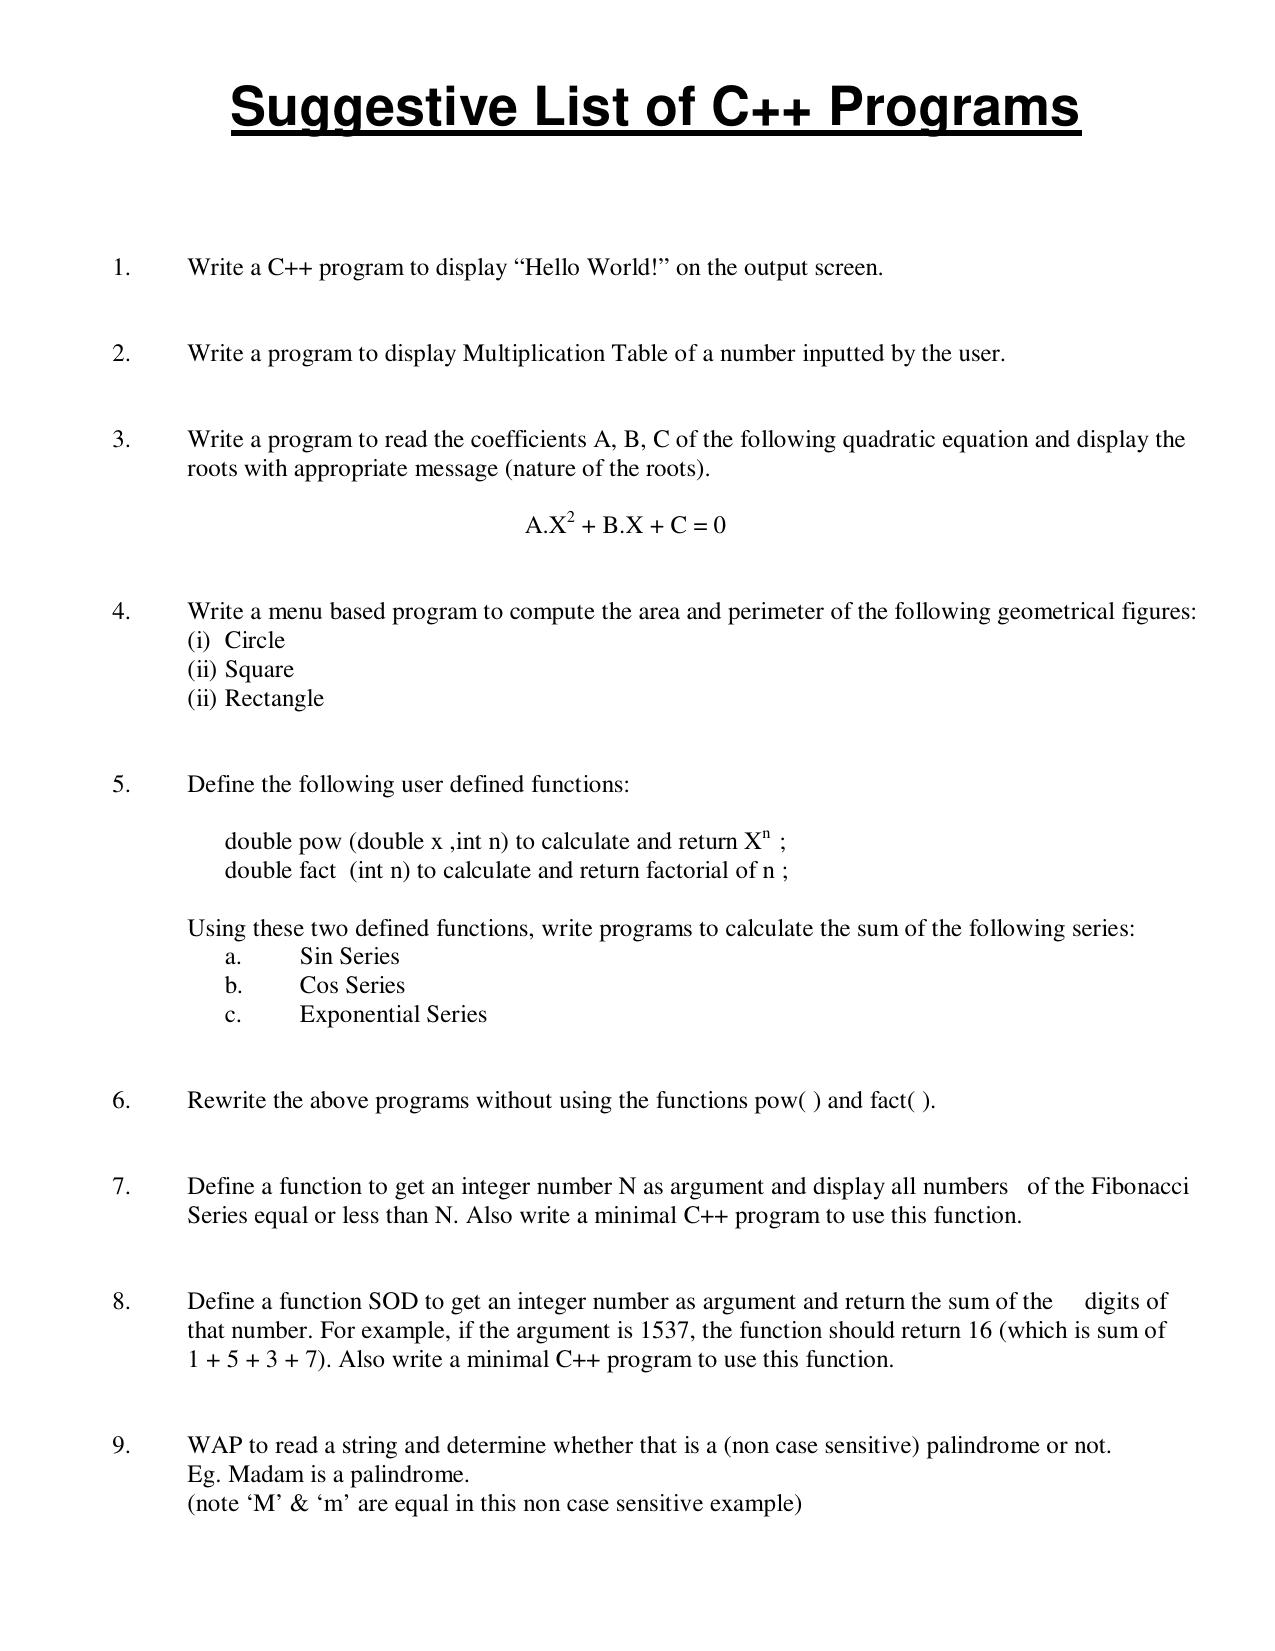 CBSE Worksheets for Class 11 Computer Science List of C++ Programs Assignment - Page 1